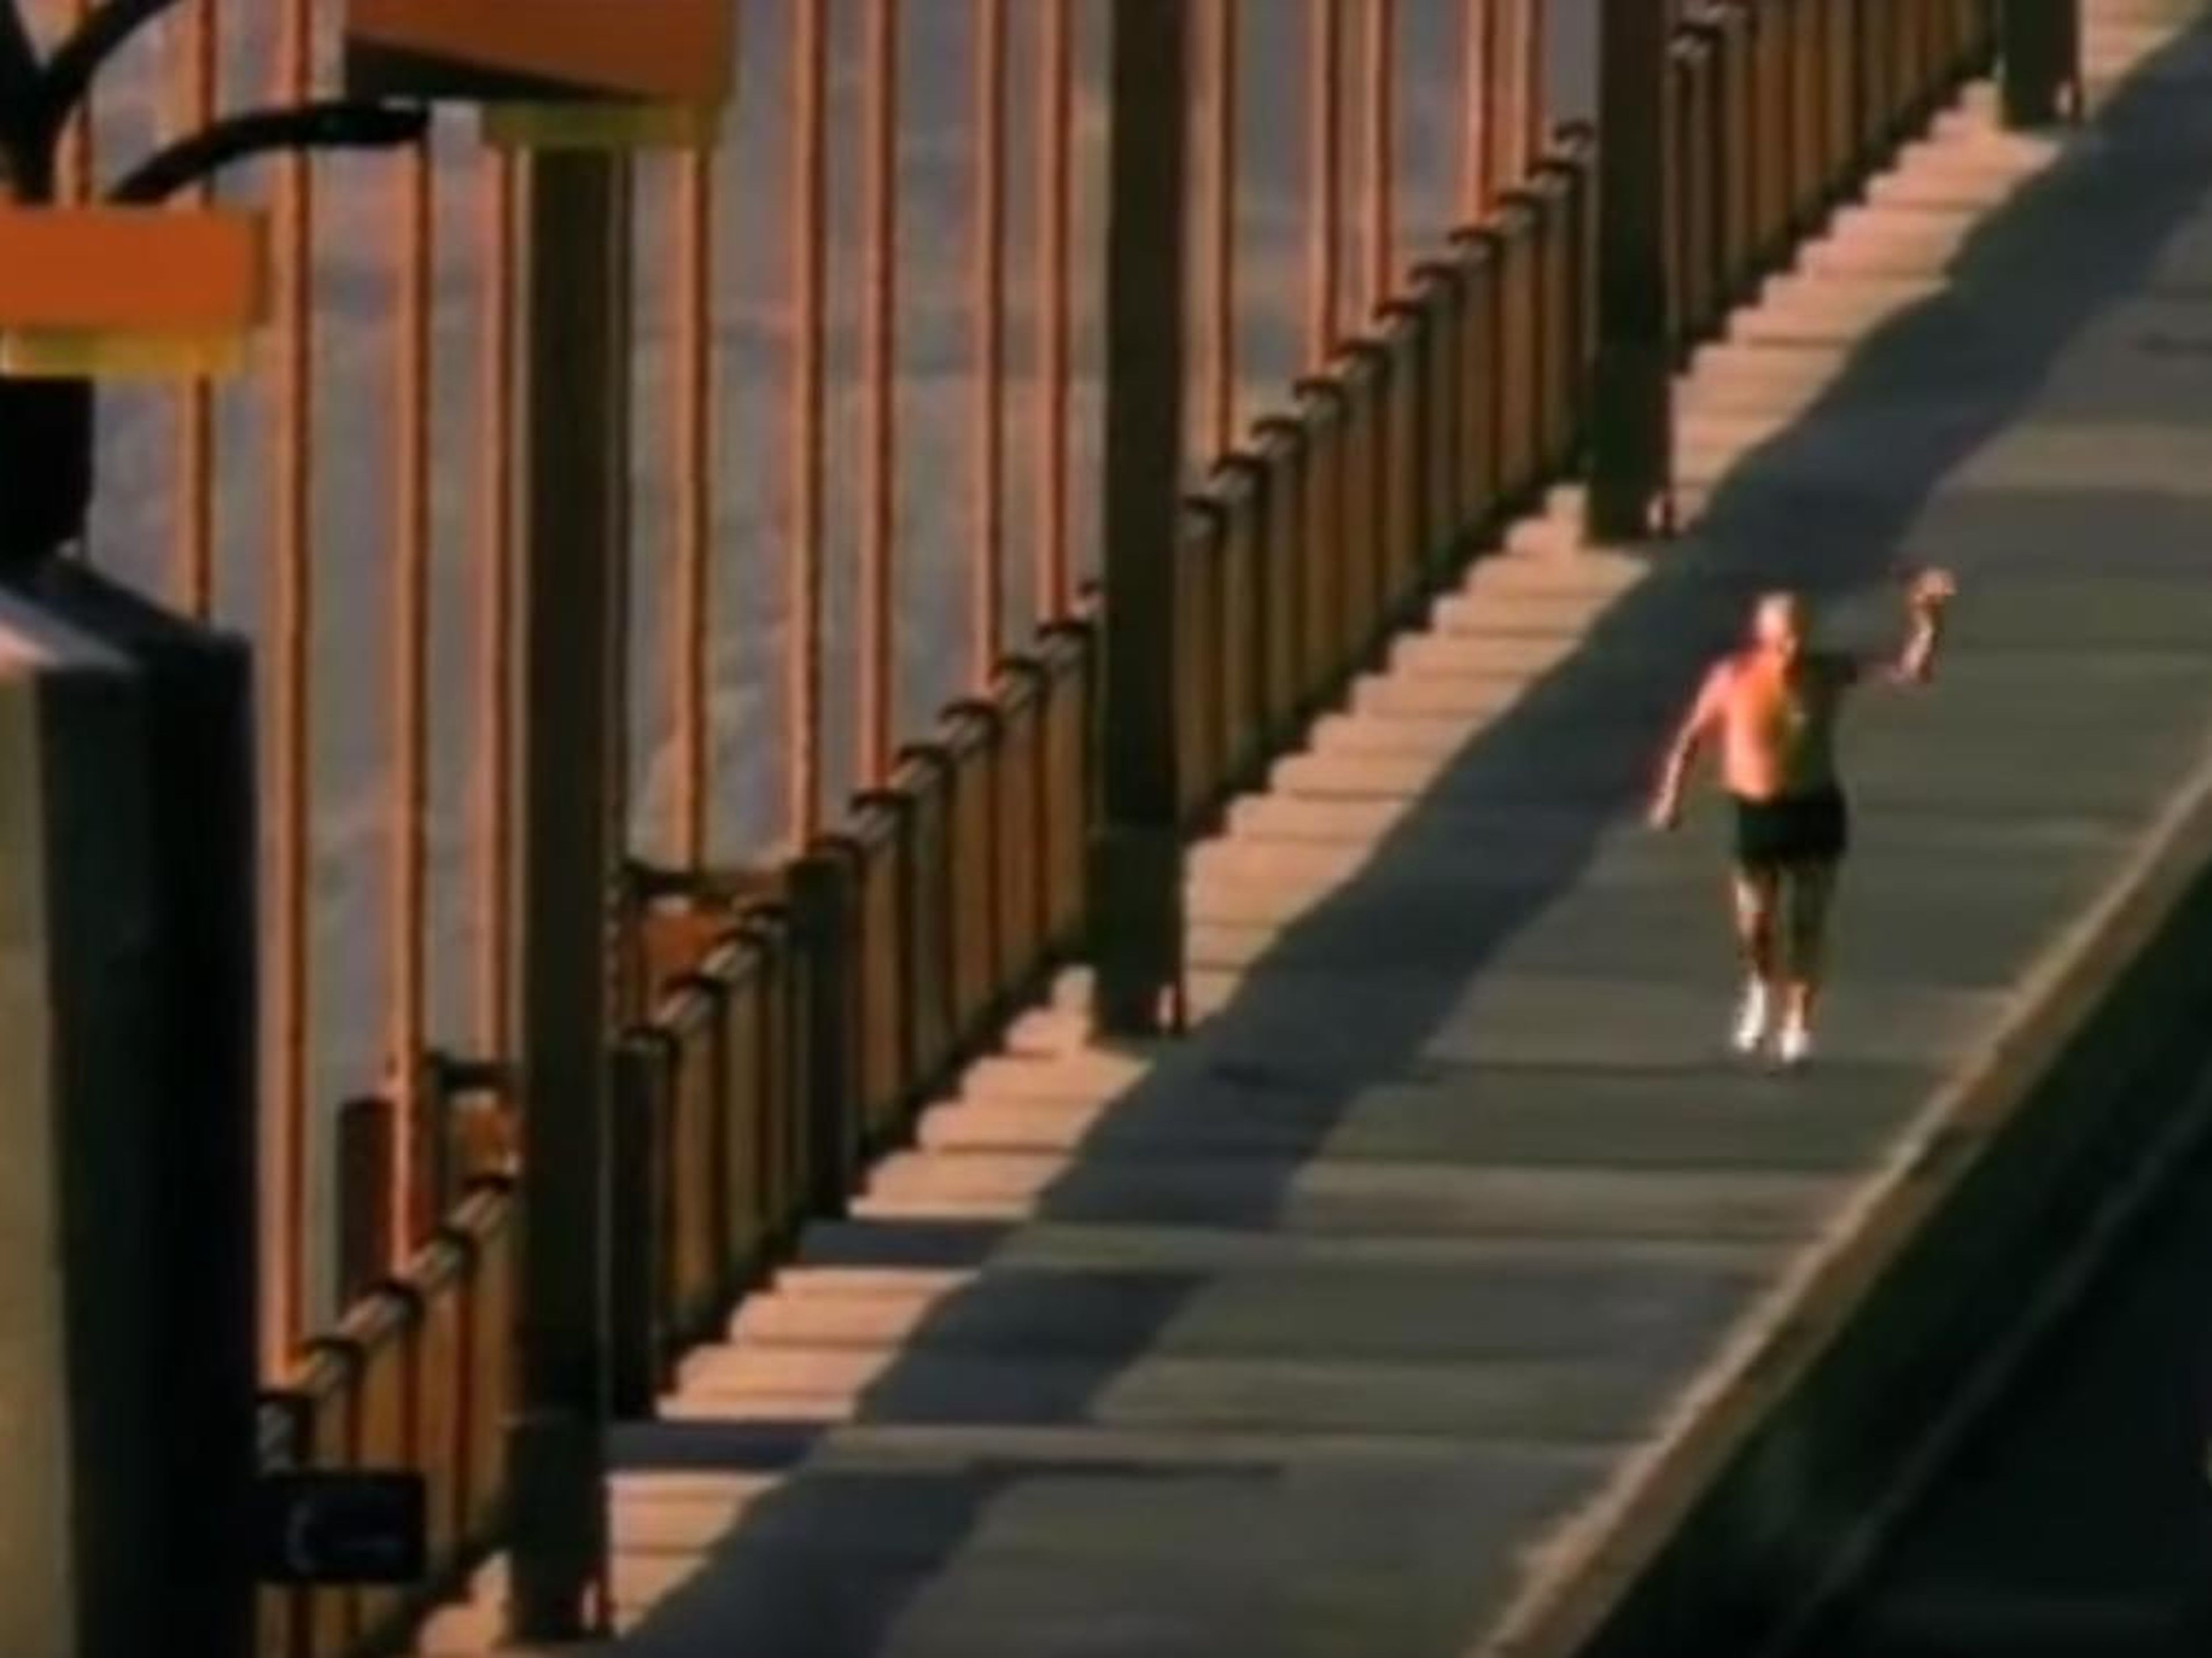 Nike's first "Just Do It" spot in 1988 addressed ageism when it featured 80-year-old Bay Area icon Walter Stack, who ran approximately 62,000 miles in his lifetime.